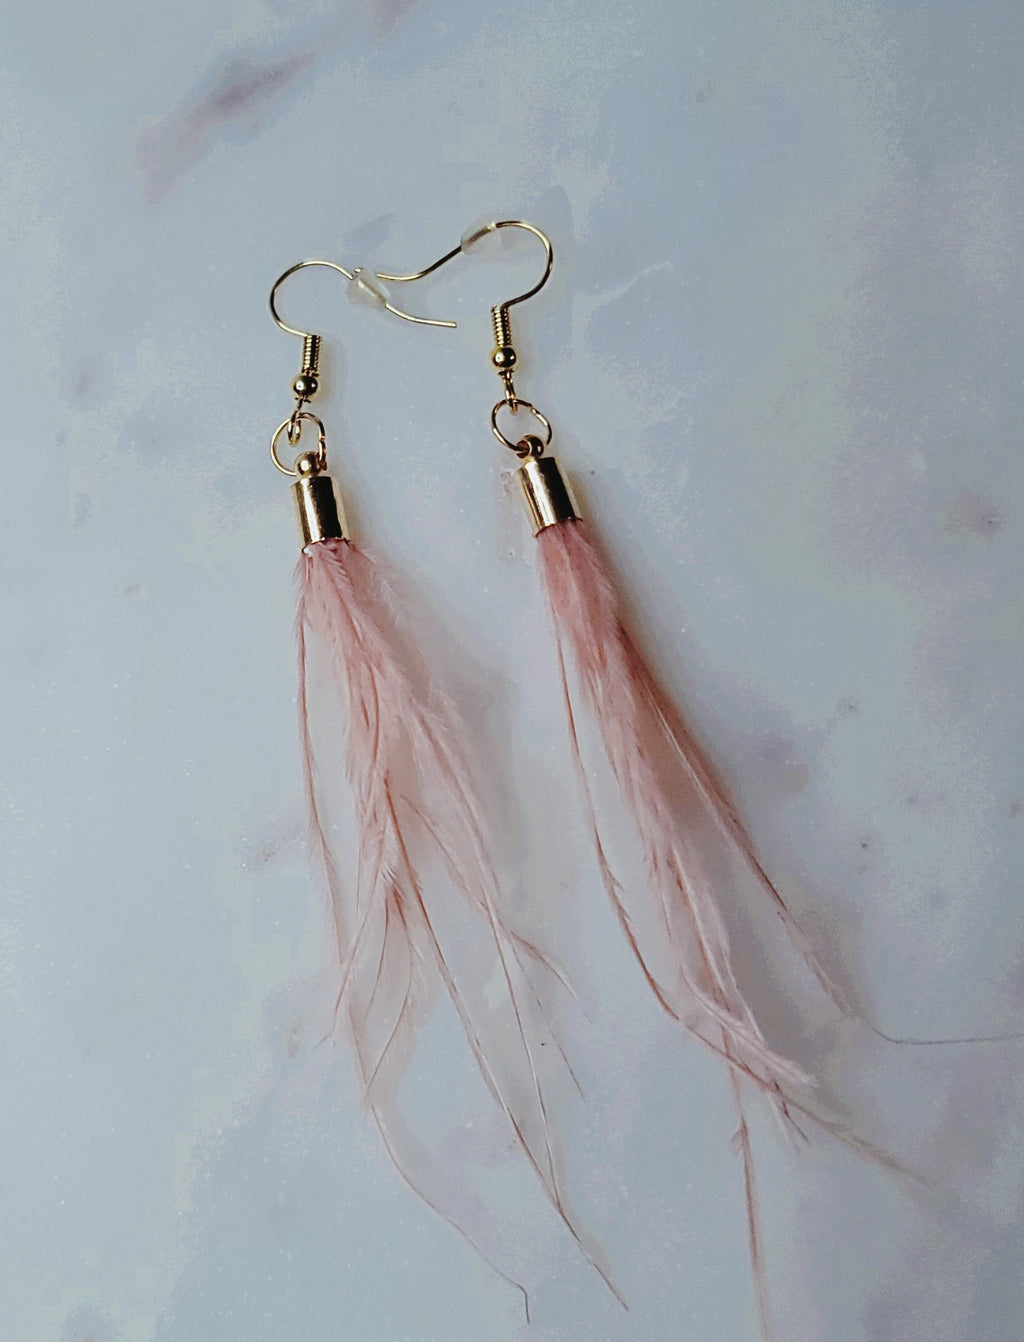 Long Earrings With Ostrich Feathers, Feather Earrings, Pink Feather Earrings,  Elegant Earrings, Bridal Earrings,long Fringe Feather Earrings - Etsy | Feather  earrings diy, Feather earrings, Etsy earrings